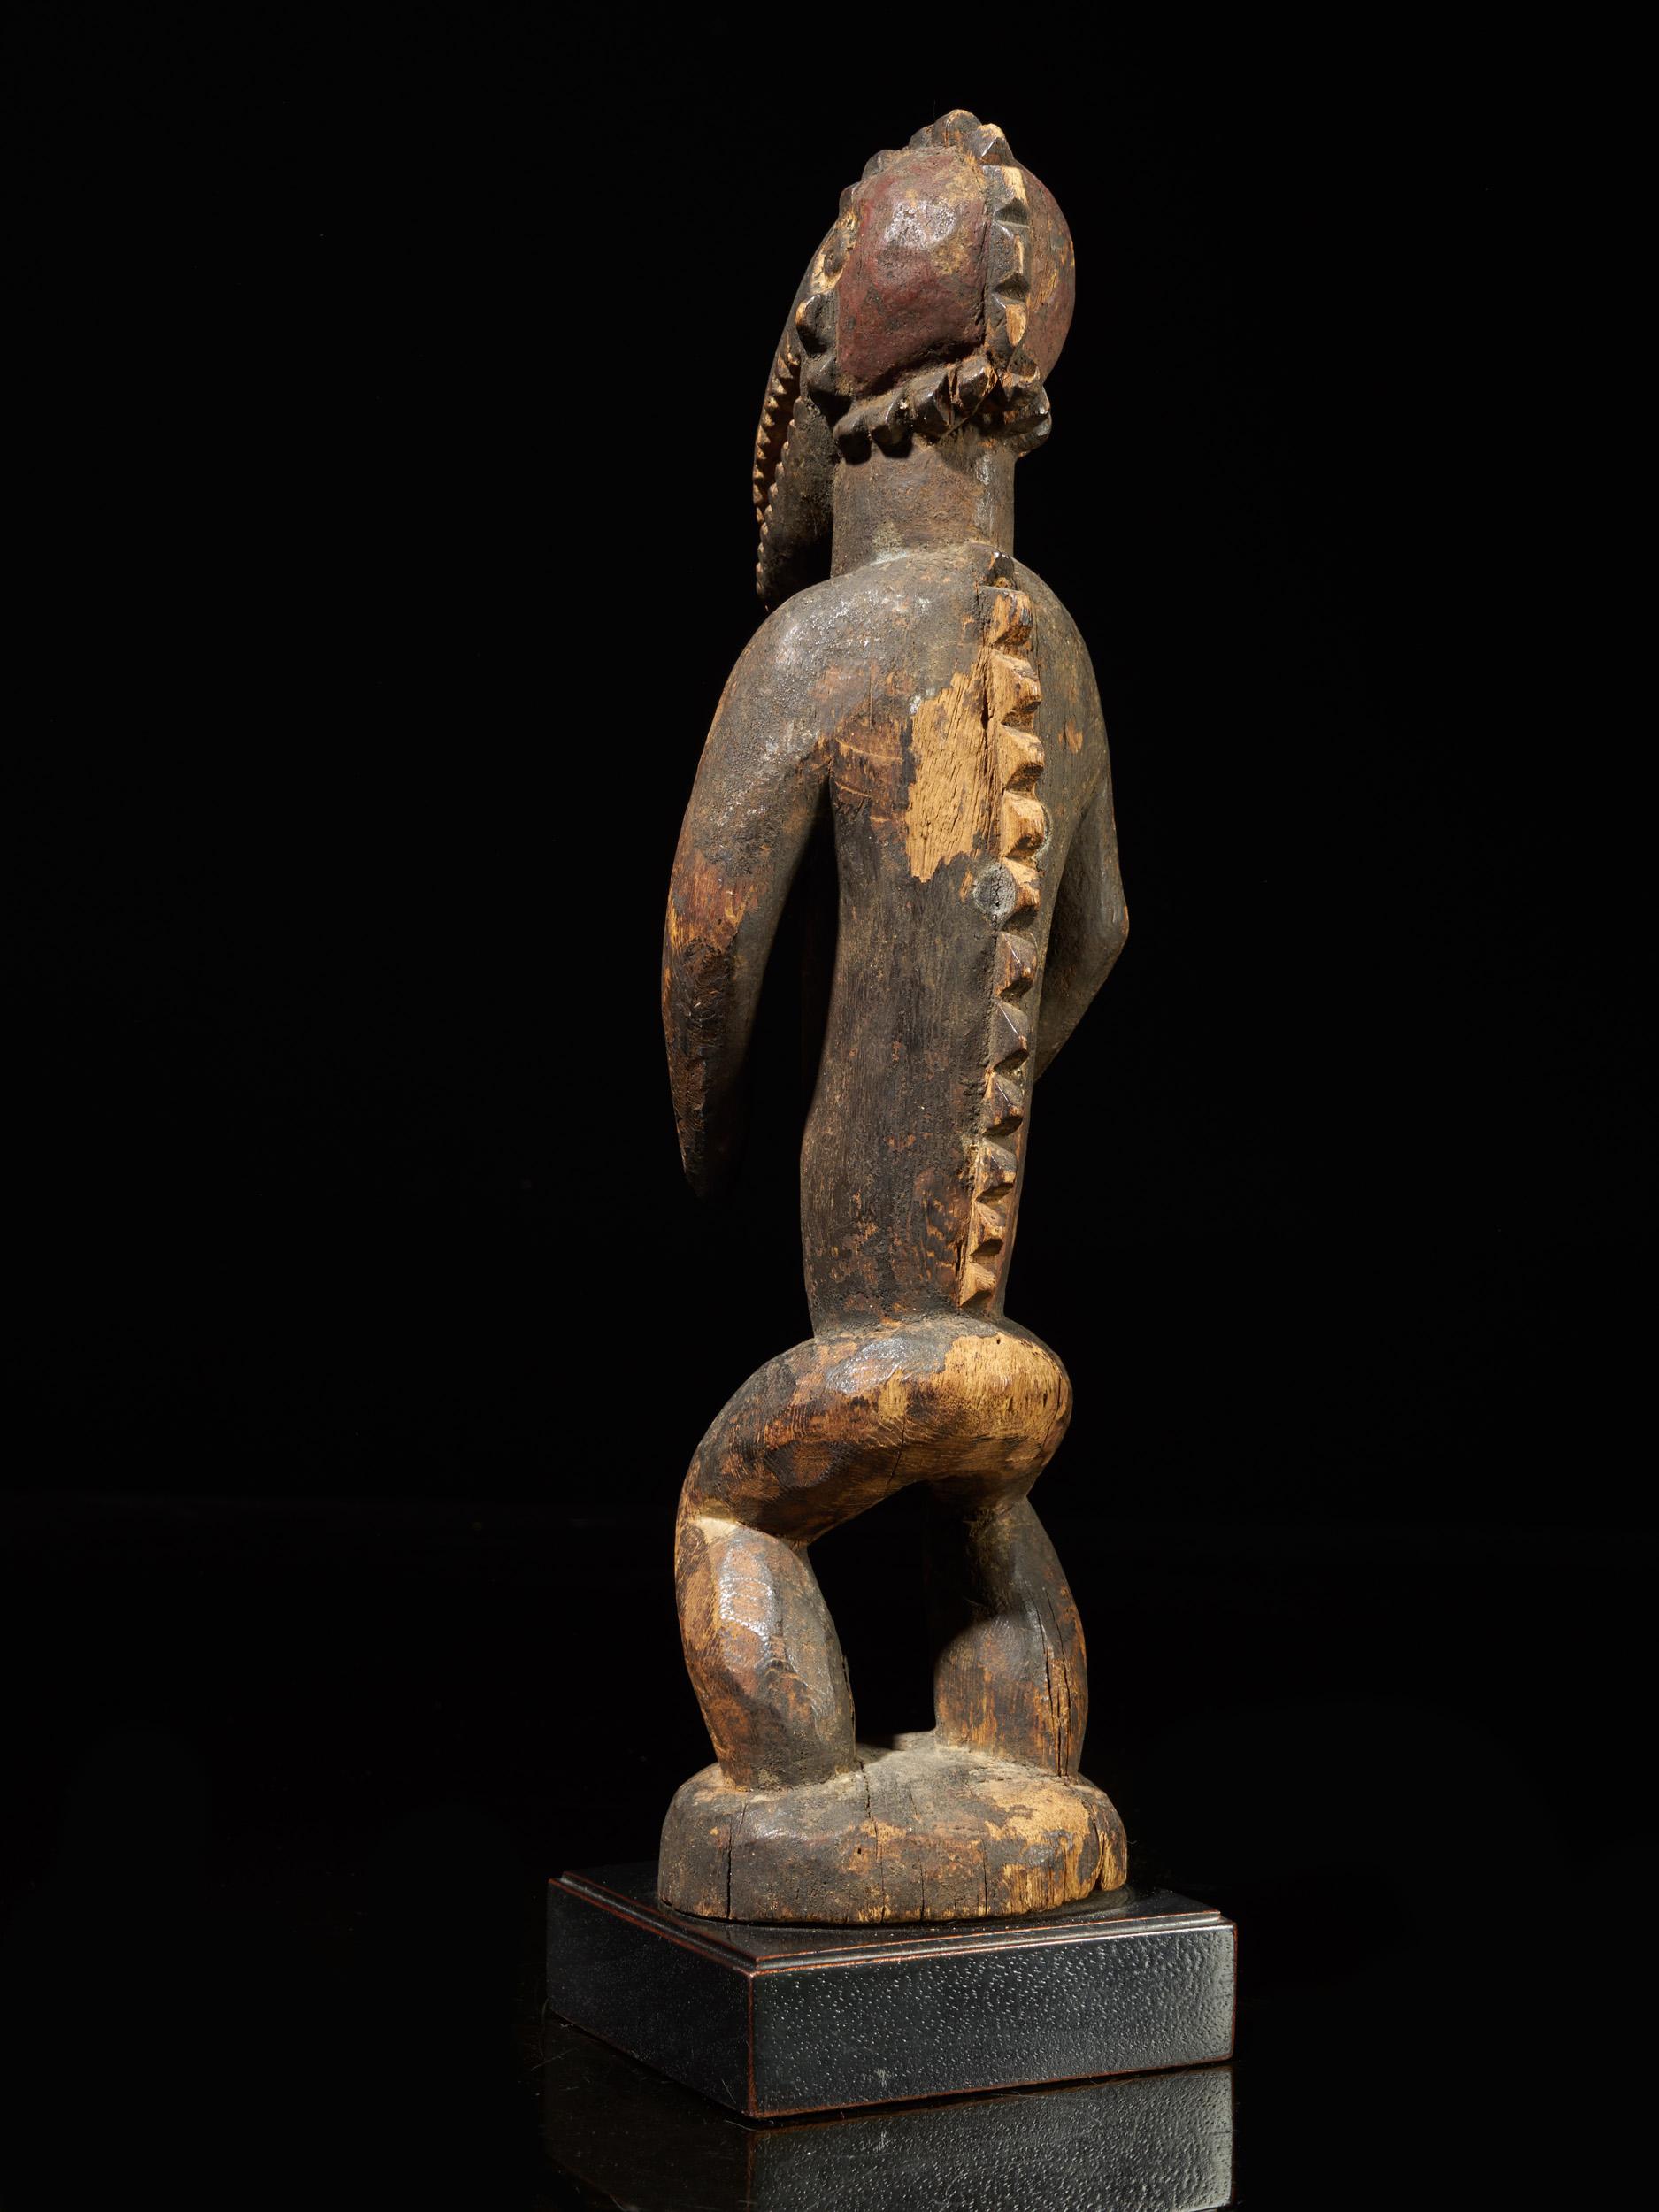 Hand-Crafted Montol-Goemai Wooden Statue Combined with Gugwom-Like Head